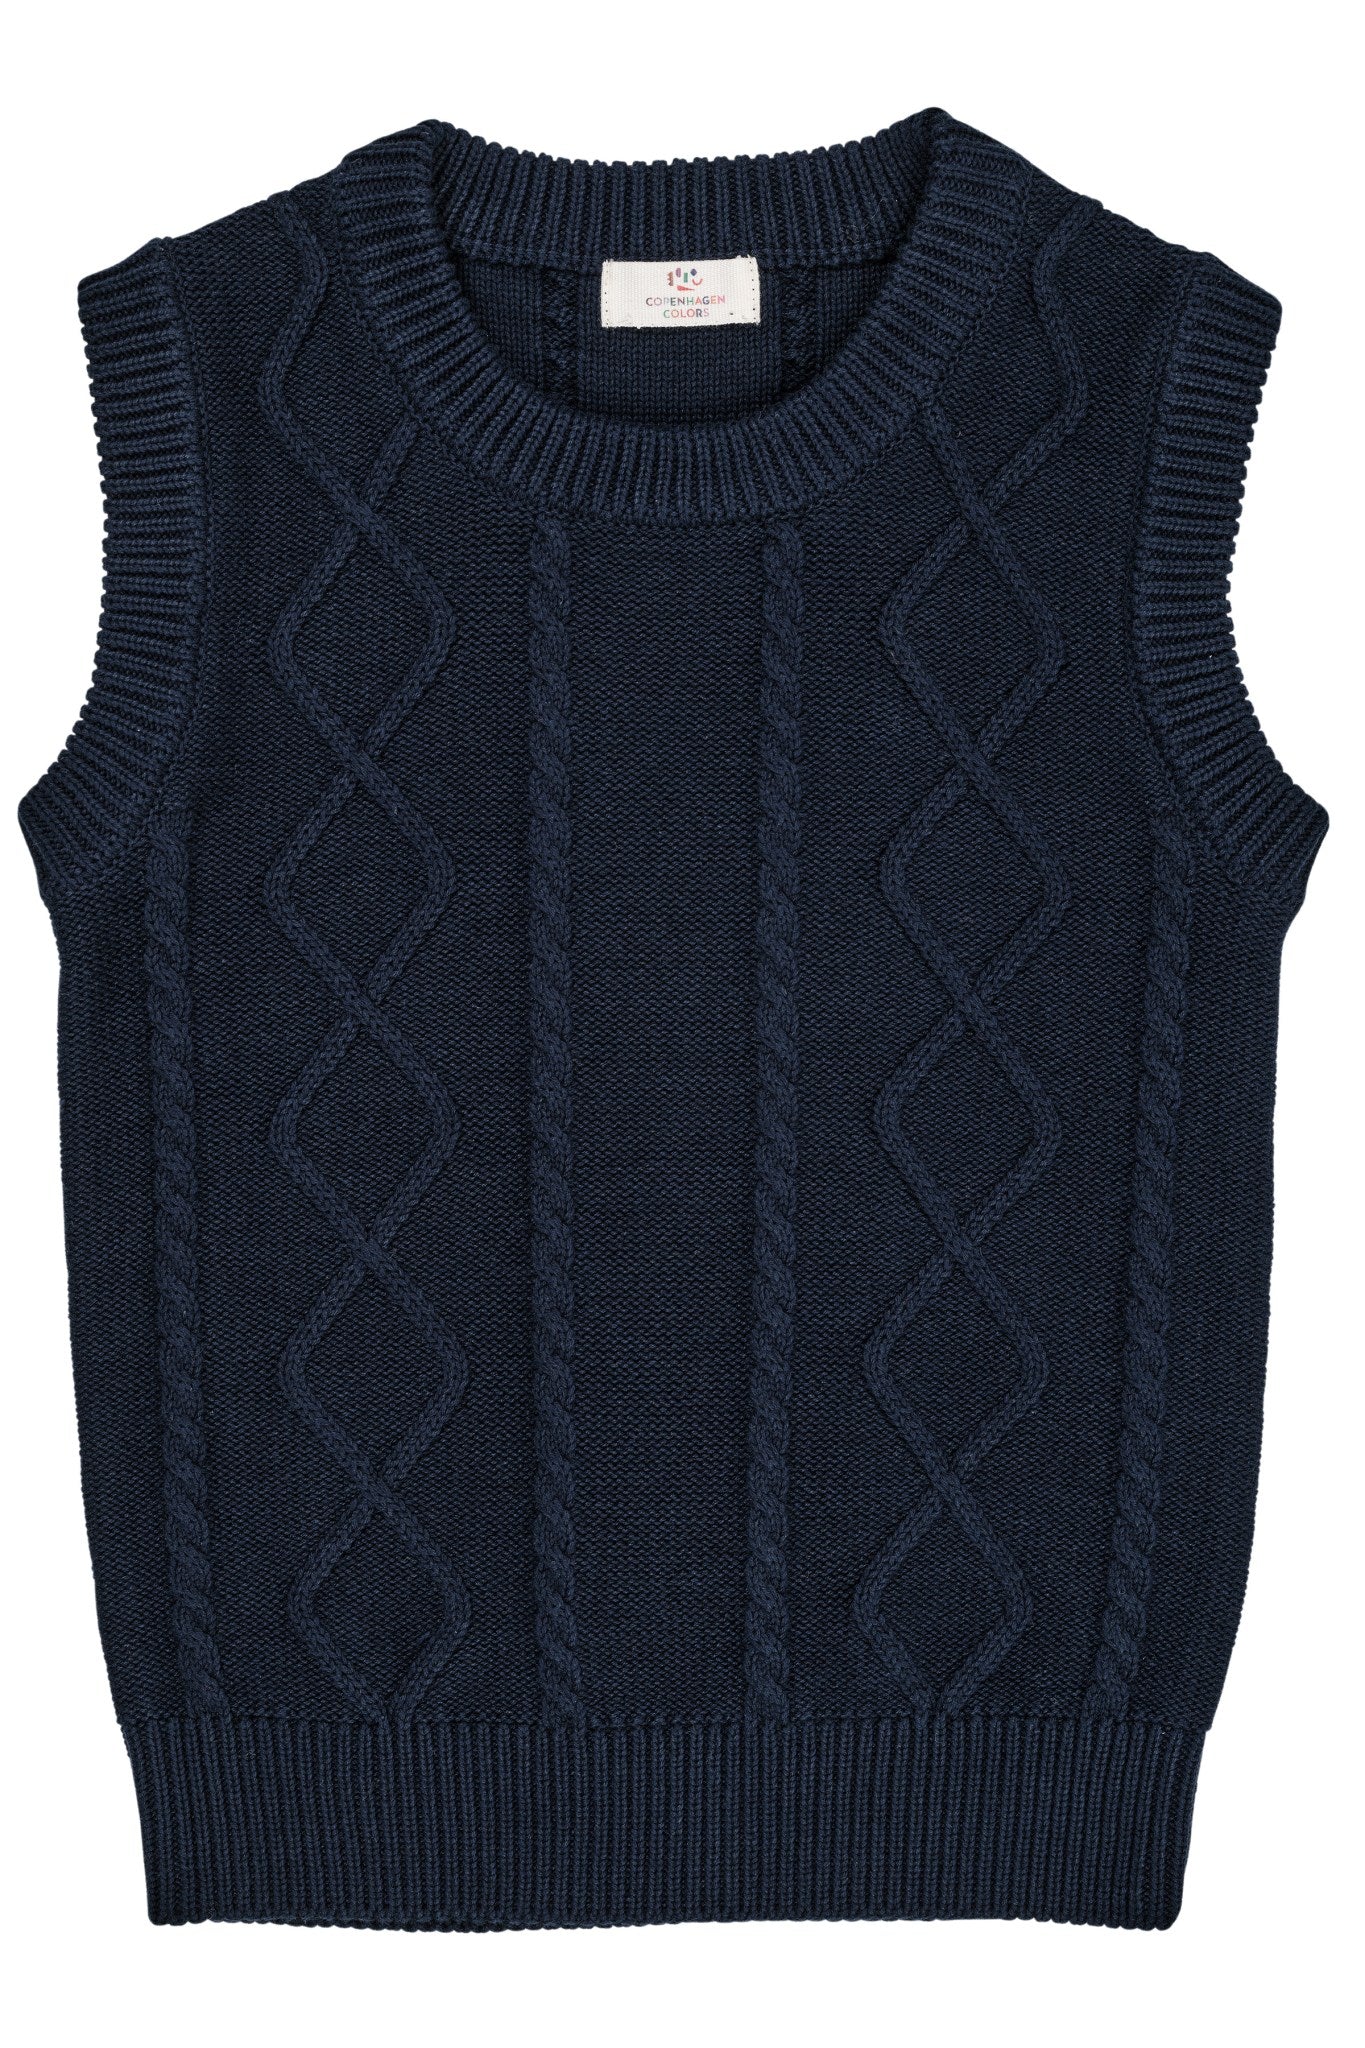 KNITTED CABLE VEST - NAVY